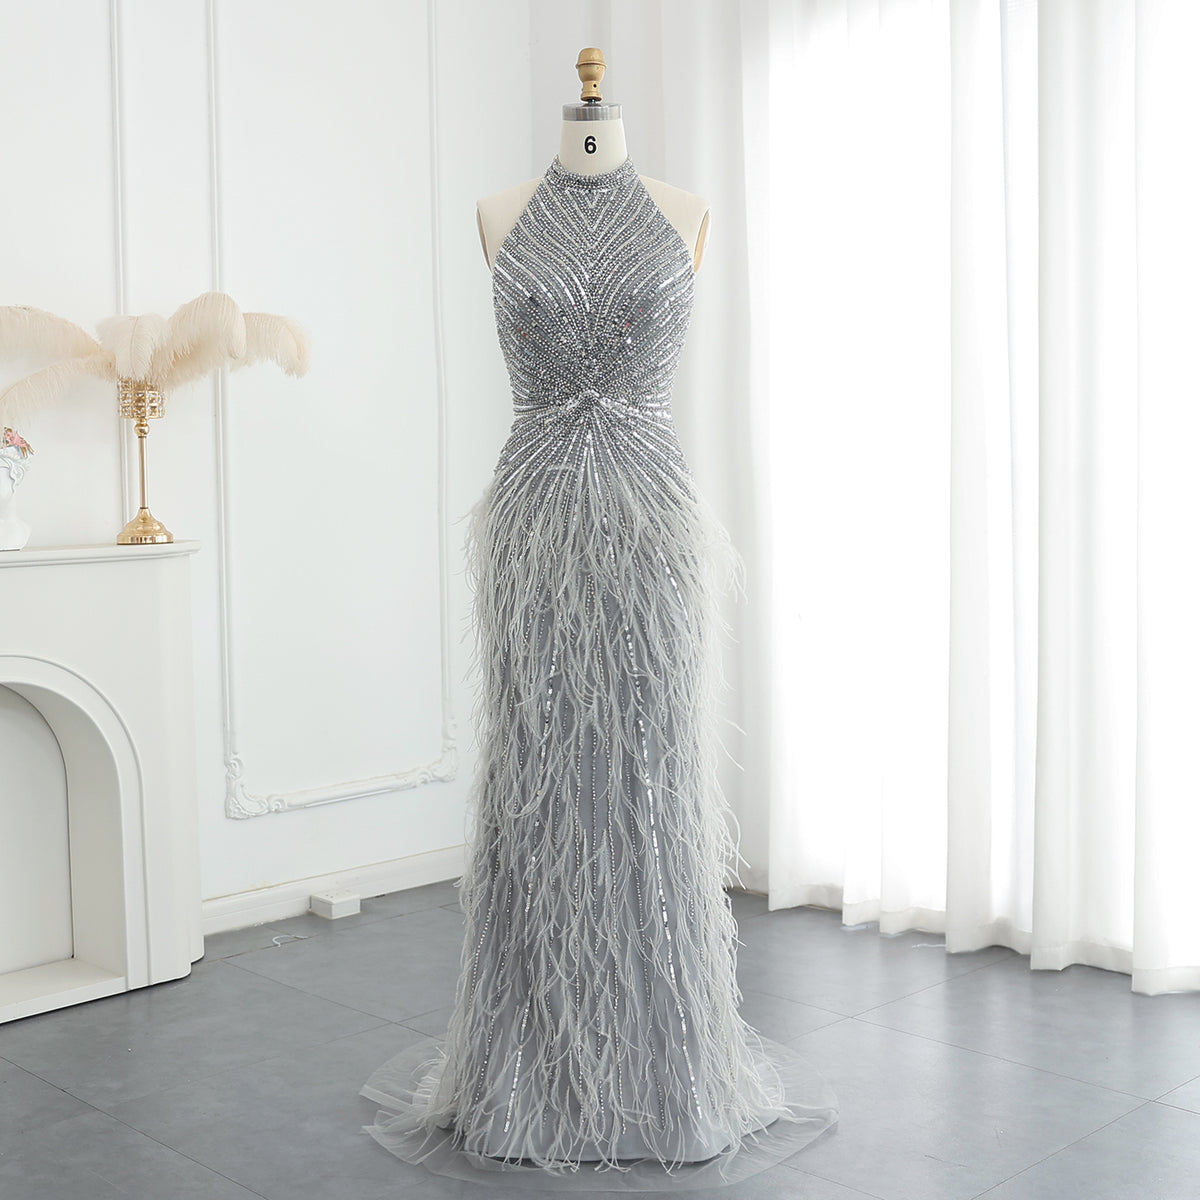 Sharon Said Luxury Beaded Feathers Mermaid Silver Gray Evening Dress Sexy Halter Backless Blue Beige Arabic Formal Party Gown SS006